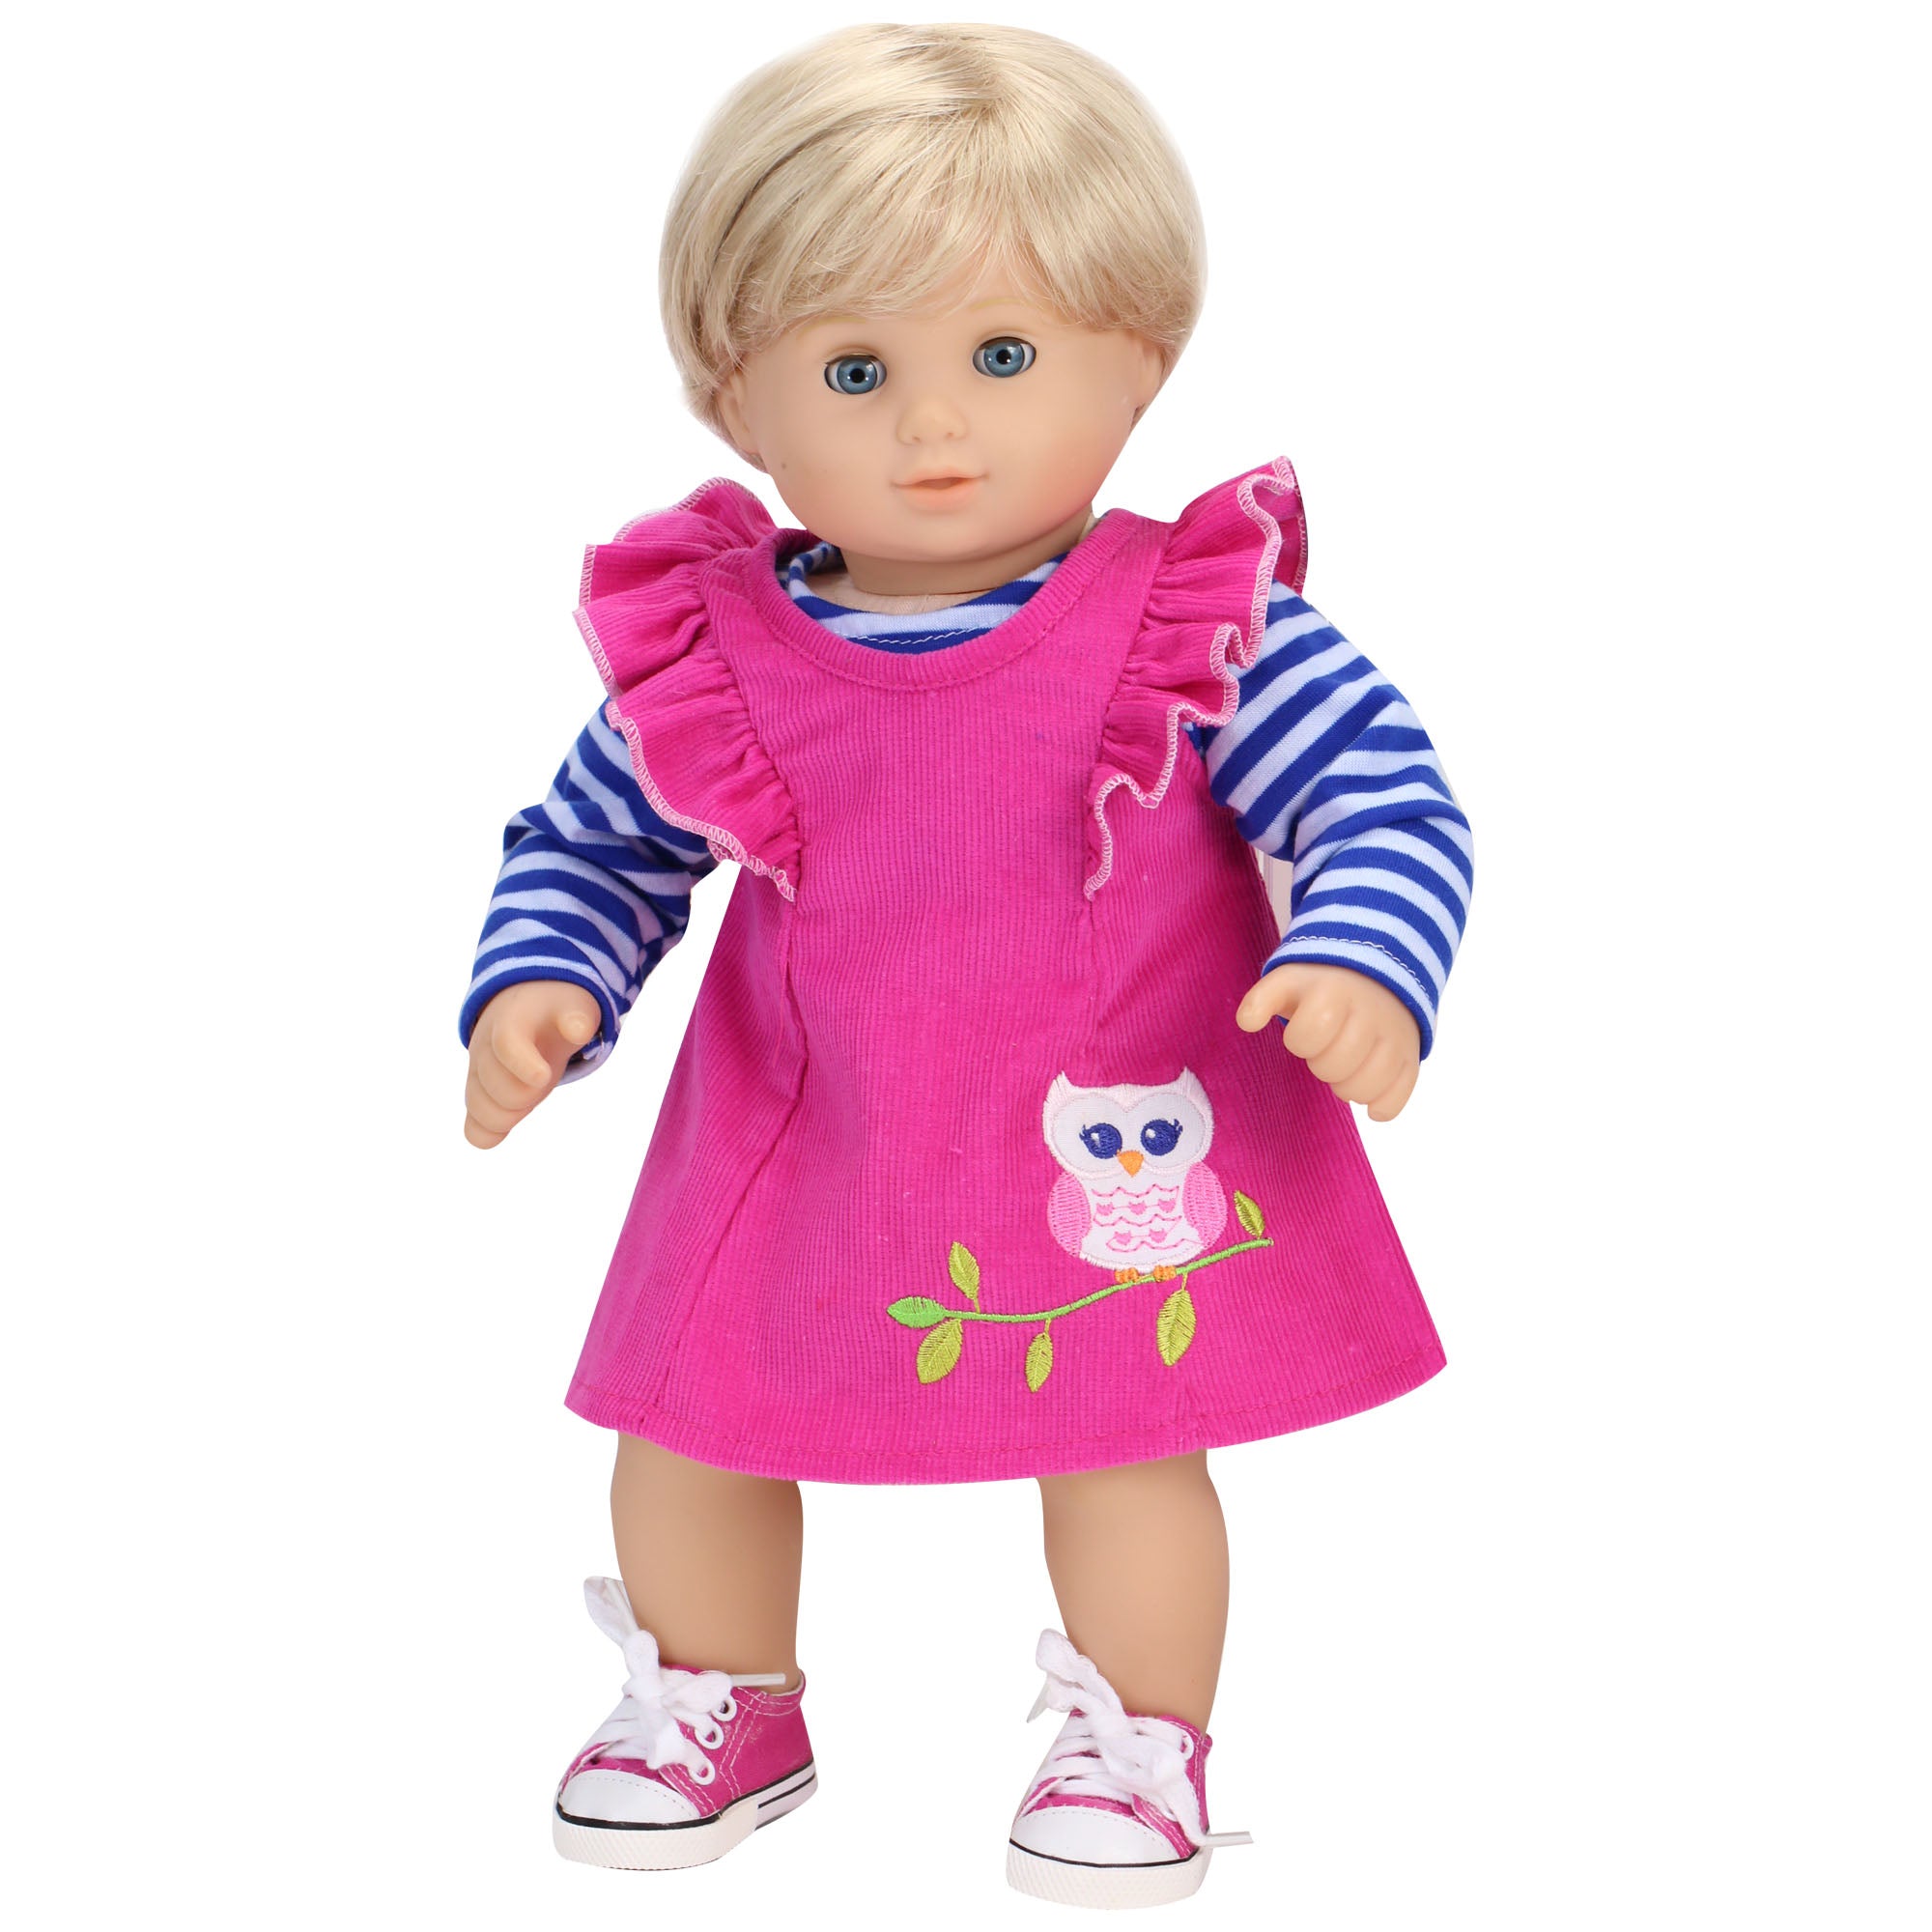 Sophia’s Cute Mix & Match Sleeveless Ruffled Corduroy Jumper with Embroidered Owl and Striped Long-Sleeve Tee for 15” Baby Dolls, Hot Pink/Blue